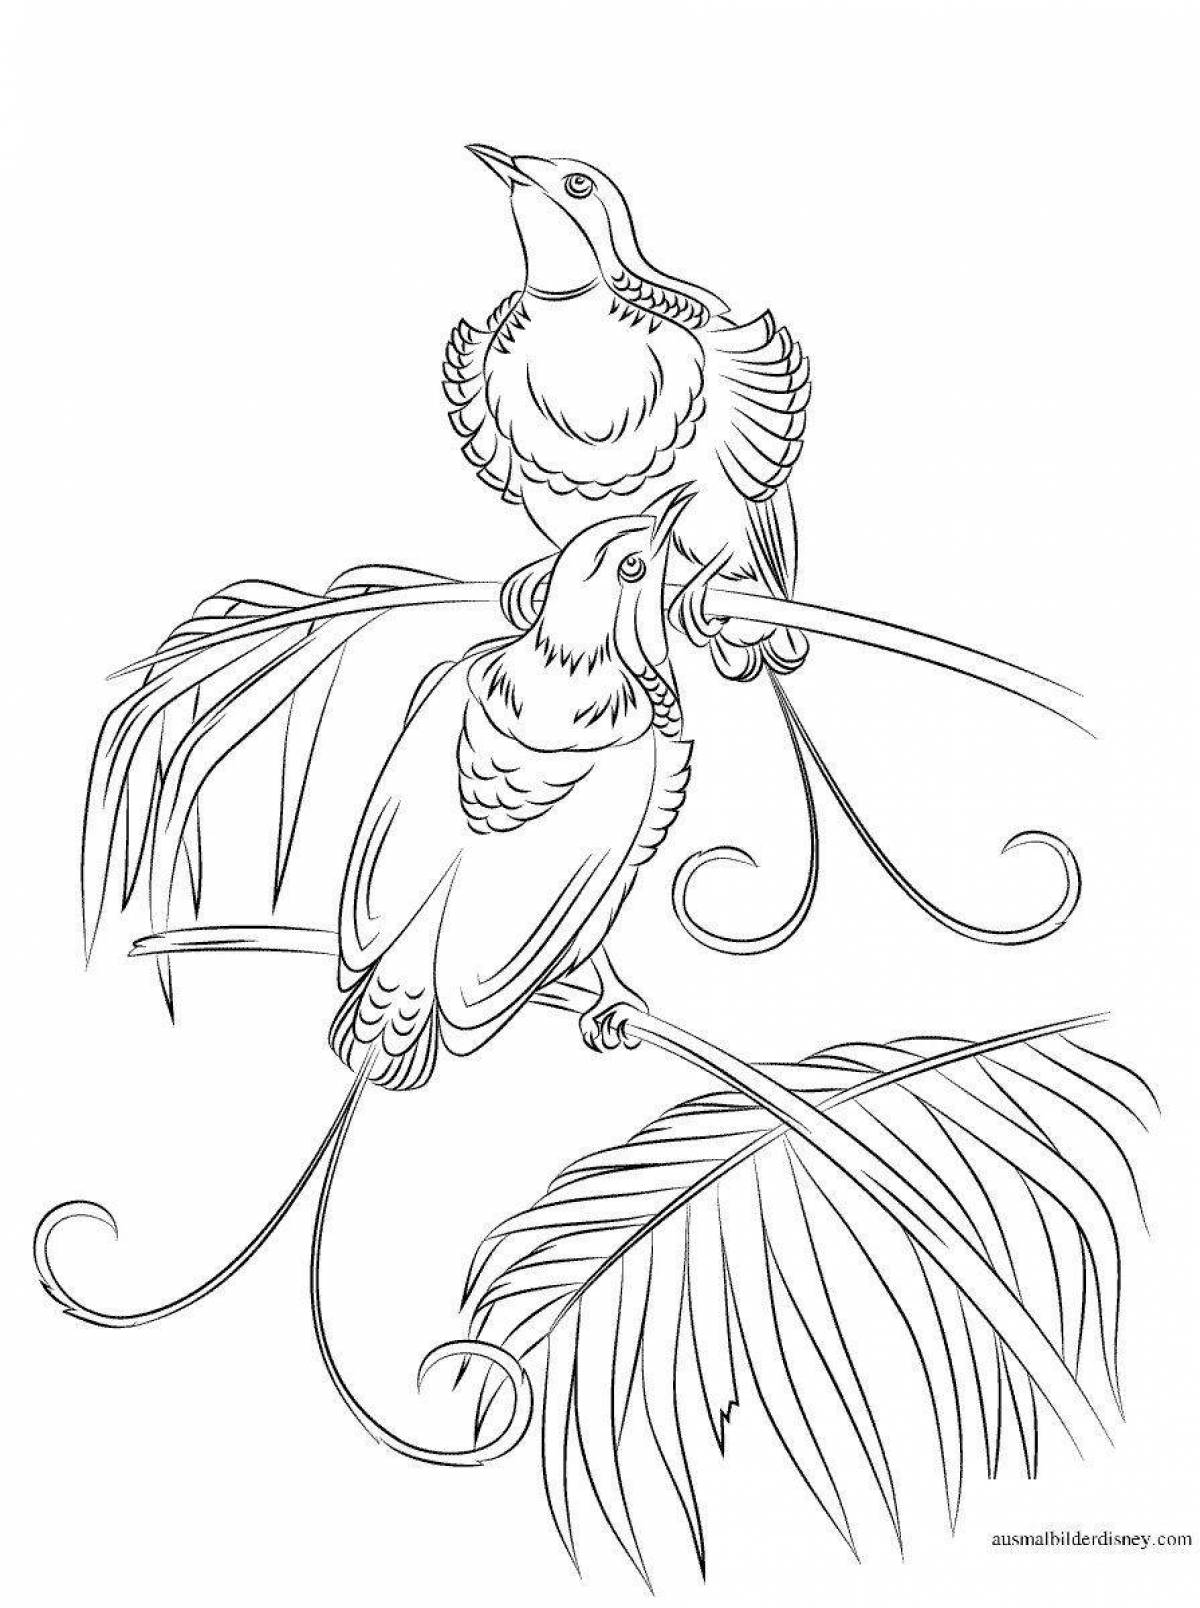 Awesome hoopoe coloring page